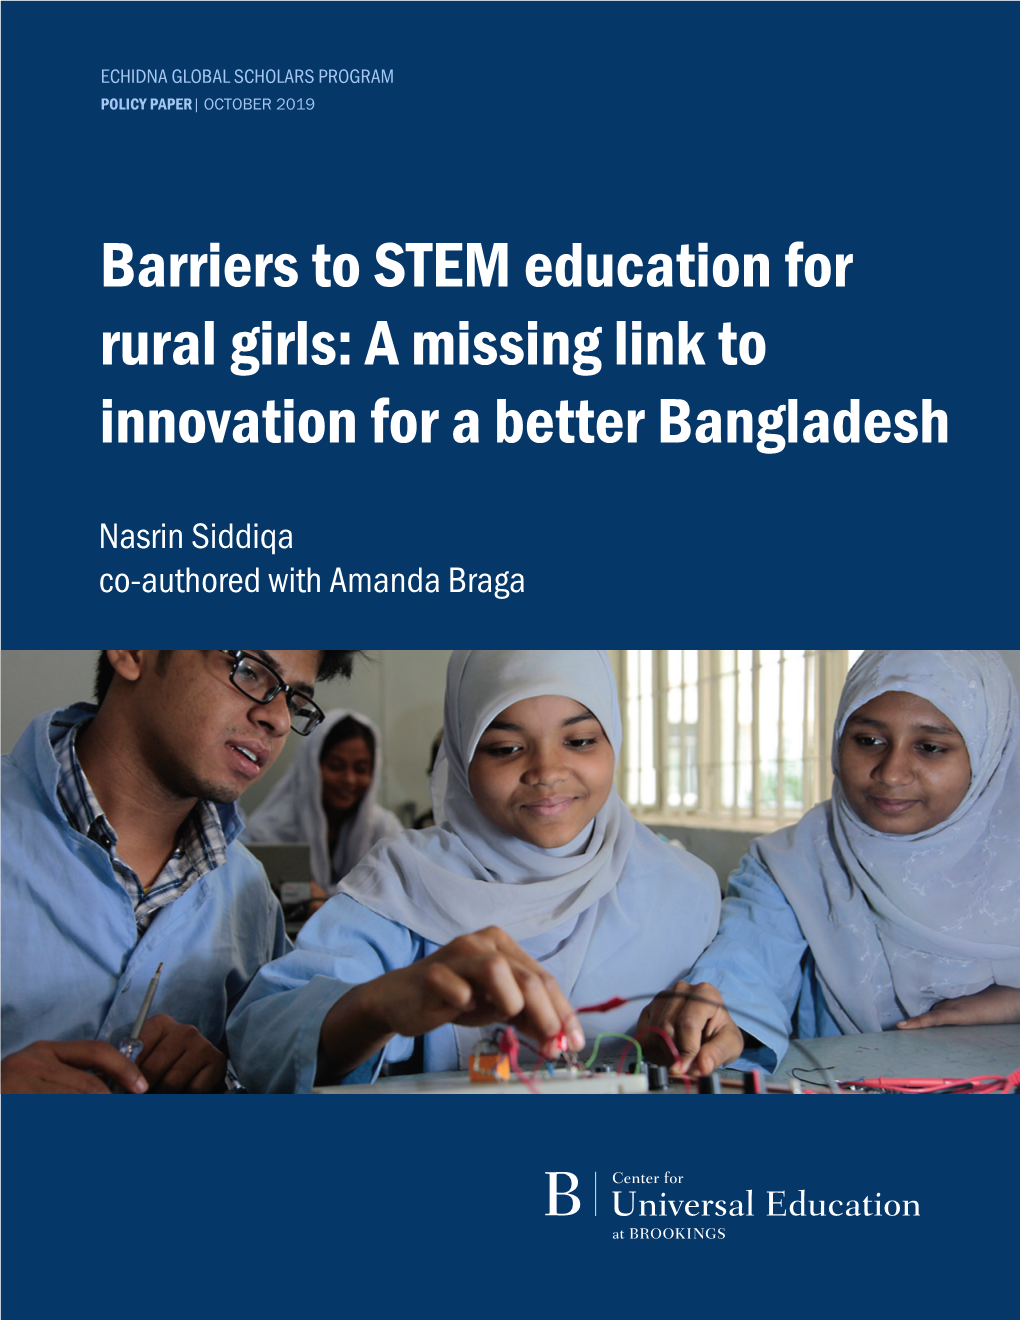 Barriers to STEM Education for Rural Girls: a Missing Link to Innovation for a Better Bangladesh